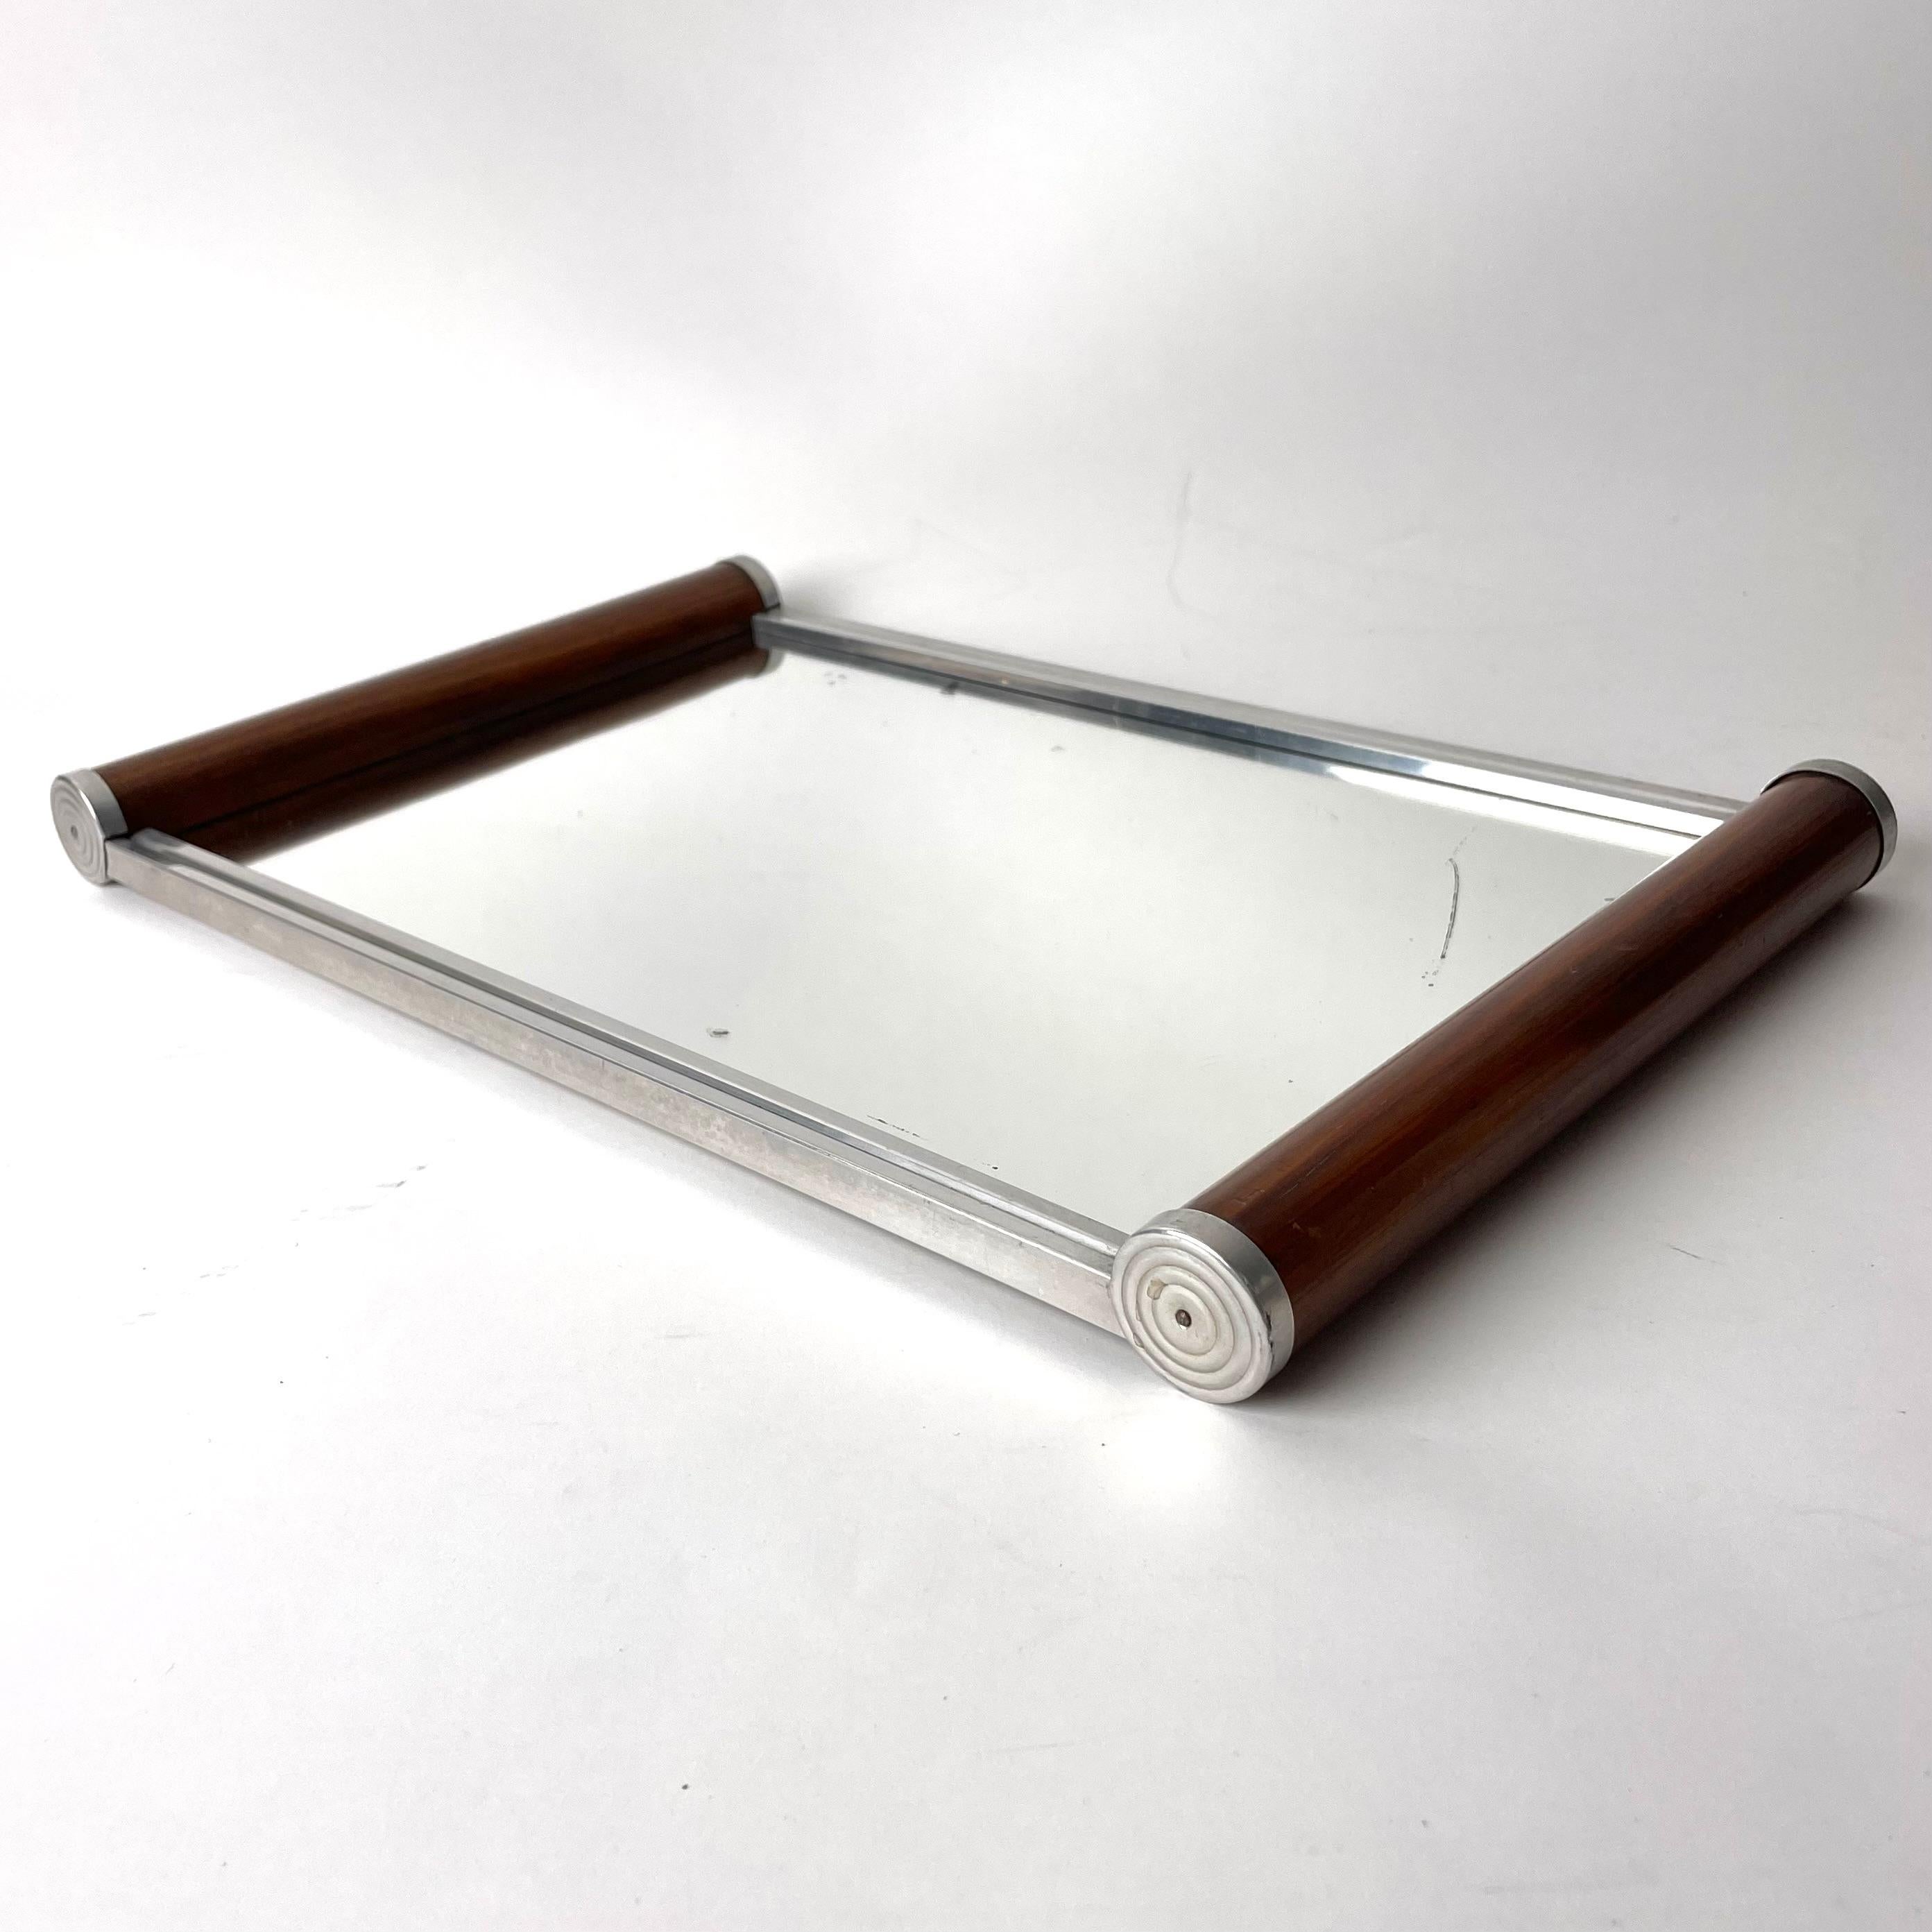 Art Deco Walnut and White Metal Mirror Tray, Europe from the 1920s or possibly the 1930s.

A refined Art Deco mirror tray. Features typical Art Deco, slight circular geometrical patterning in metalwork at edges of round handles. Melds materials